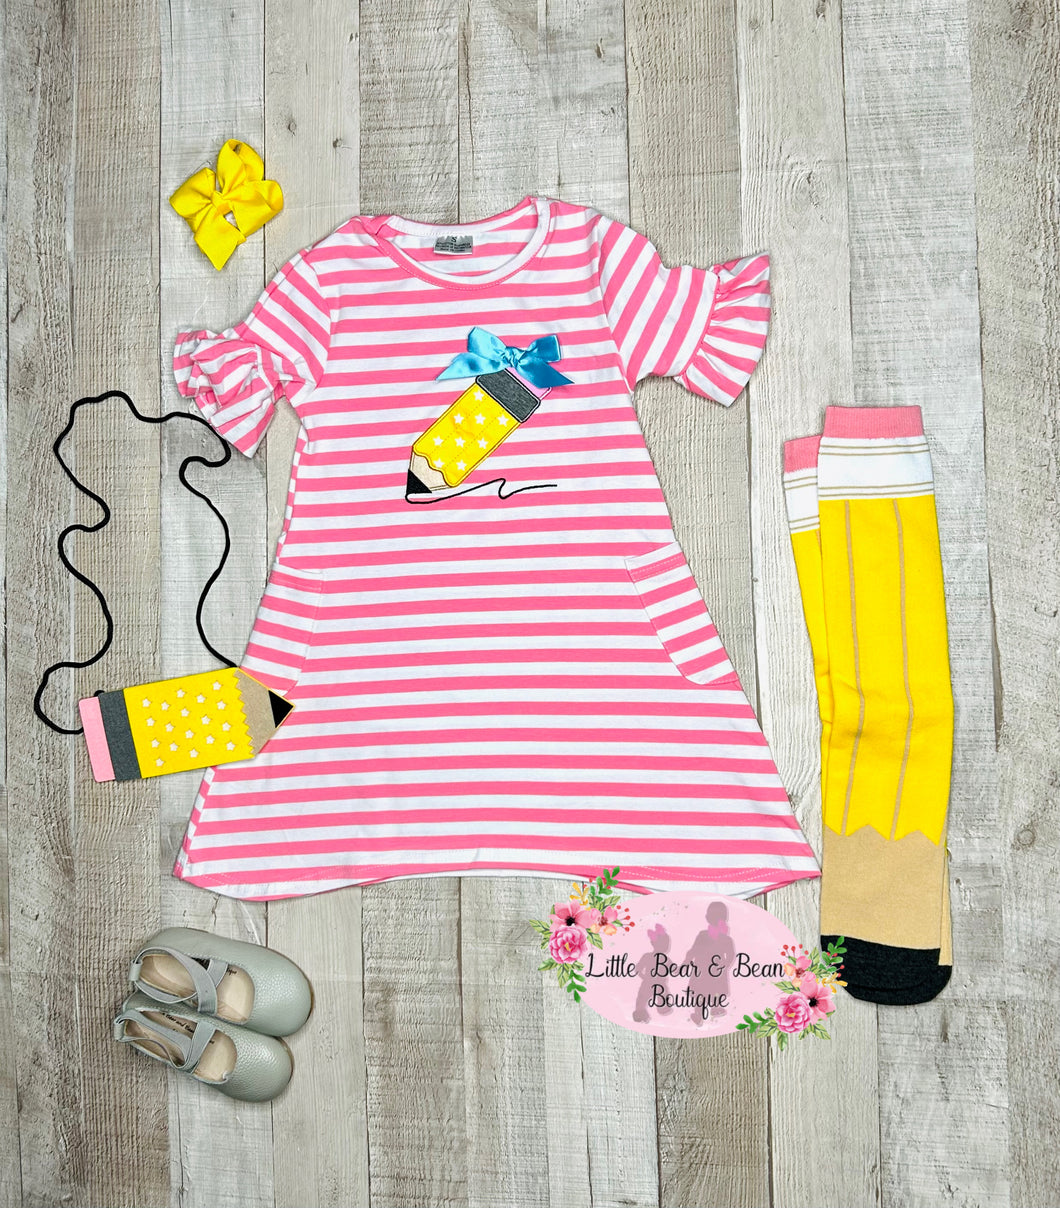 Striped Pencil Pocket Dress with Socks and Purse